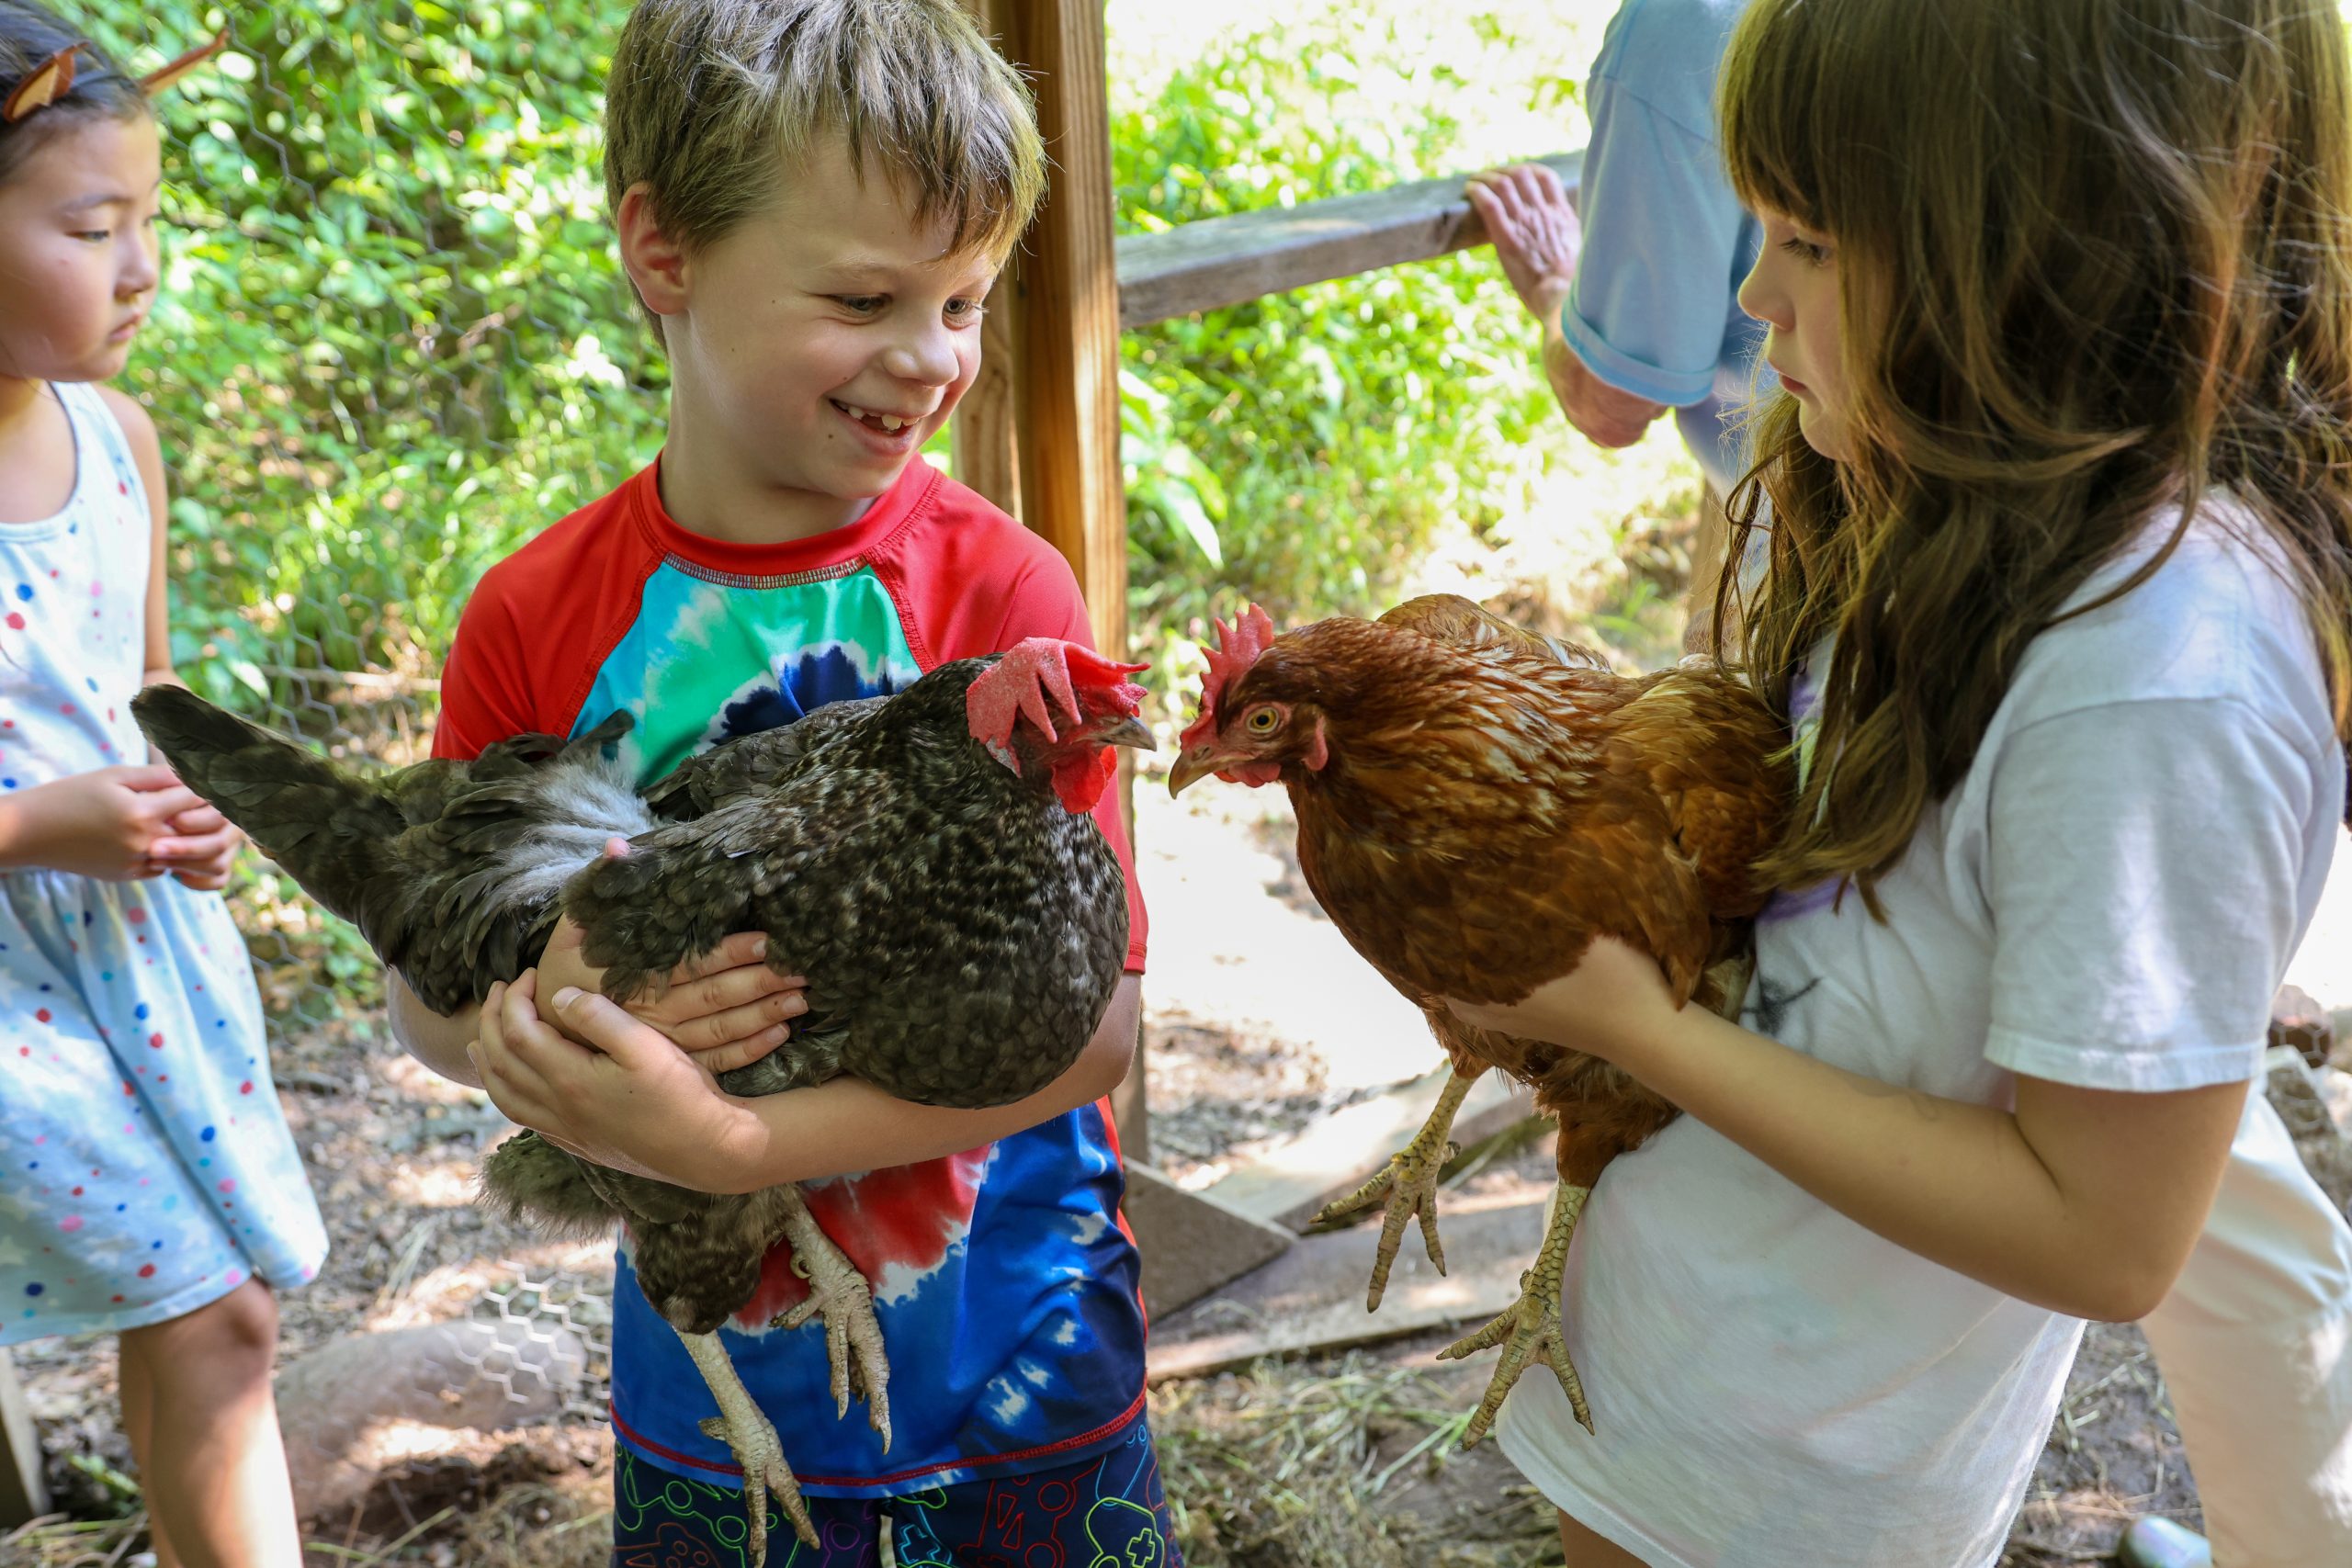 The Nature Place Day Camp campers holding 2 chickens outdoors in a chicken coop